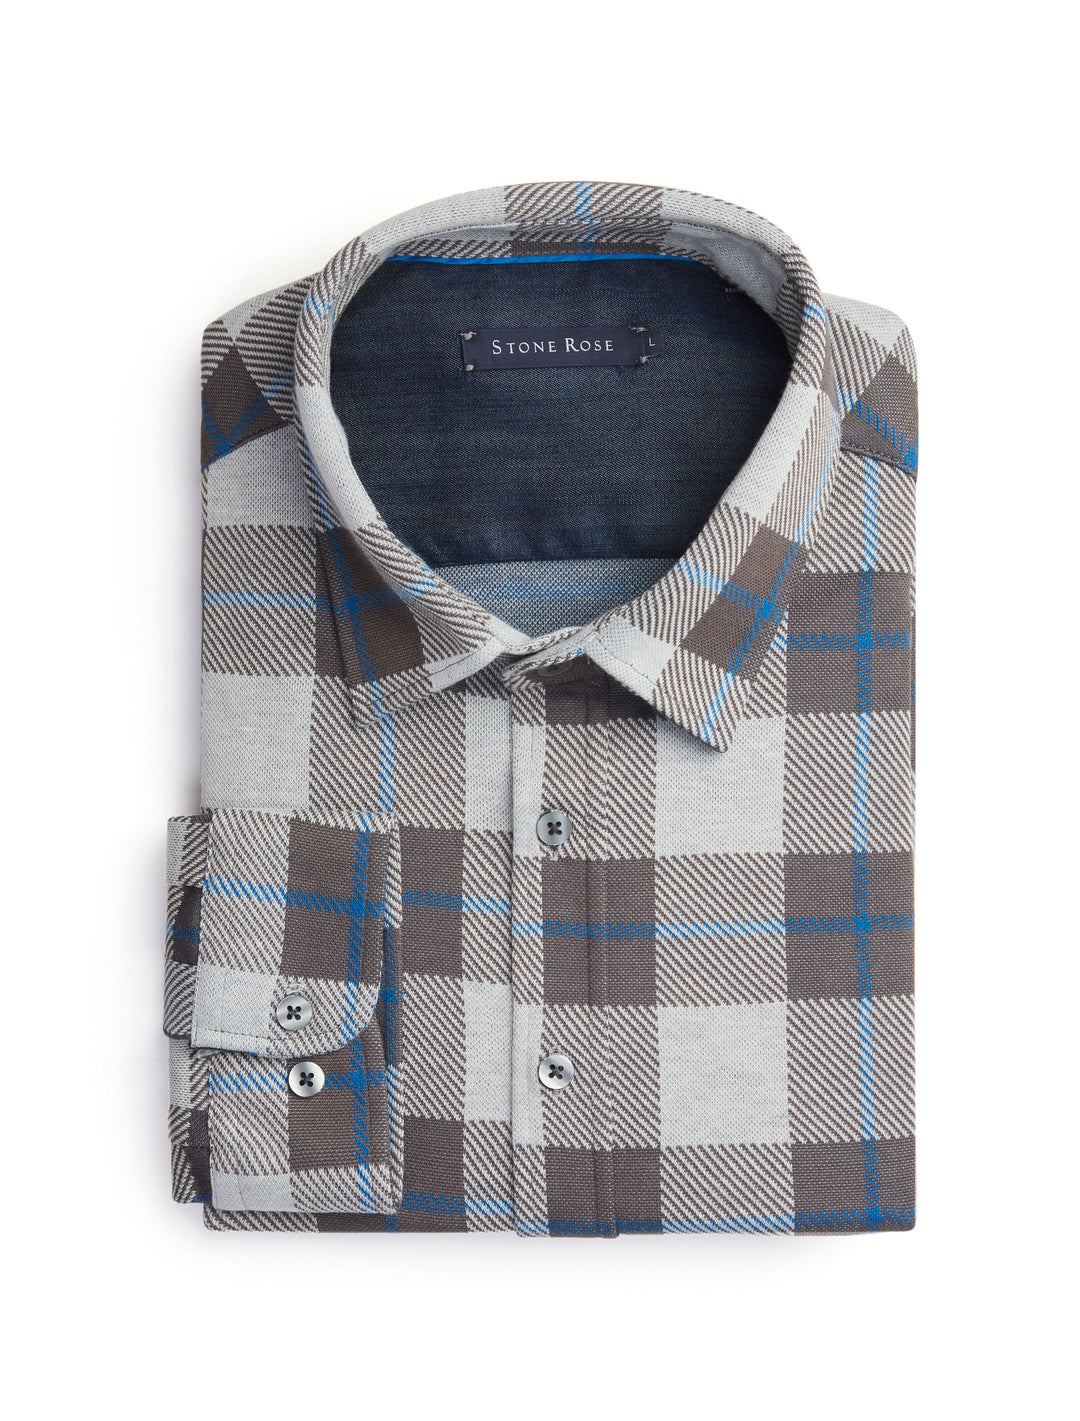 LONG SLEEVE FLANNEL CHECK SHIRT (GREY) - STONE ROSE